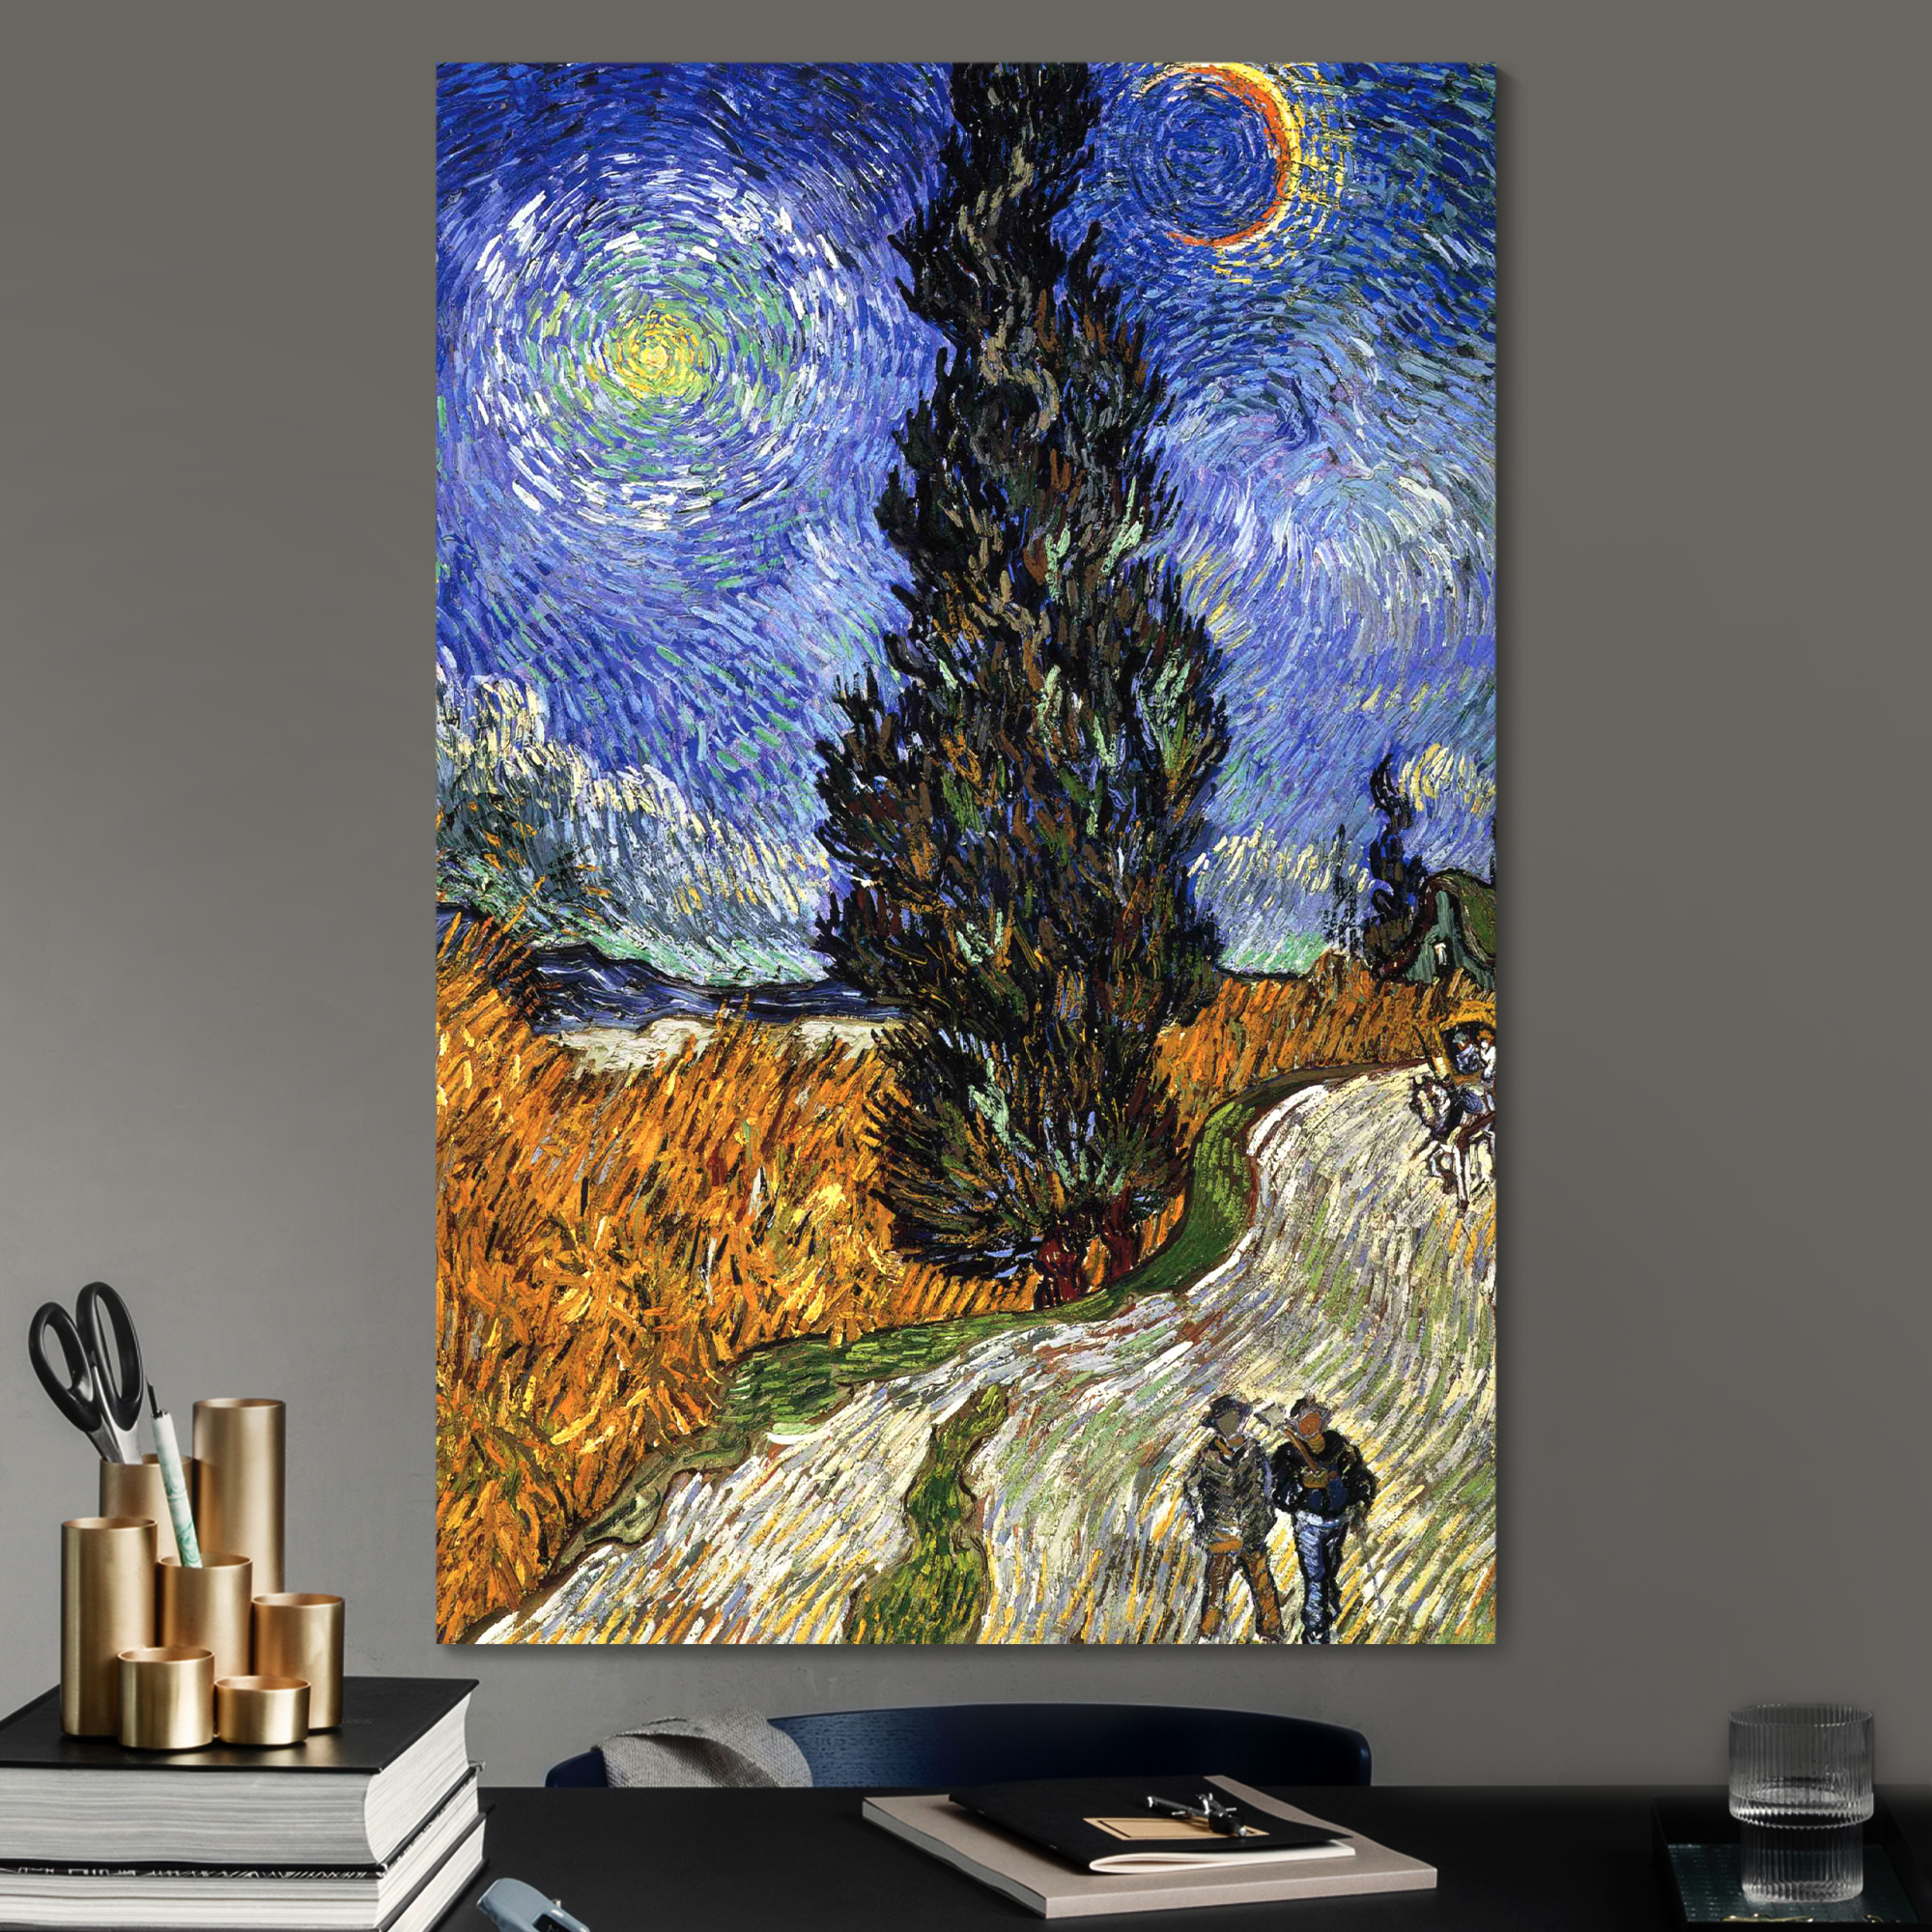 Road with Cypress and Star by Vincent Van Gogh Giclee Canvas Prints Wrapped Gallery Wall Art | Stretched and Framed Ready to Hang - 32